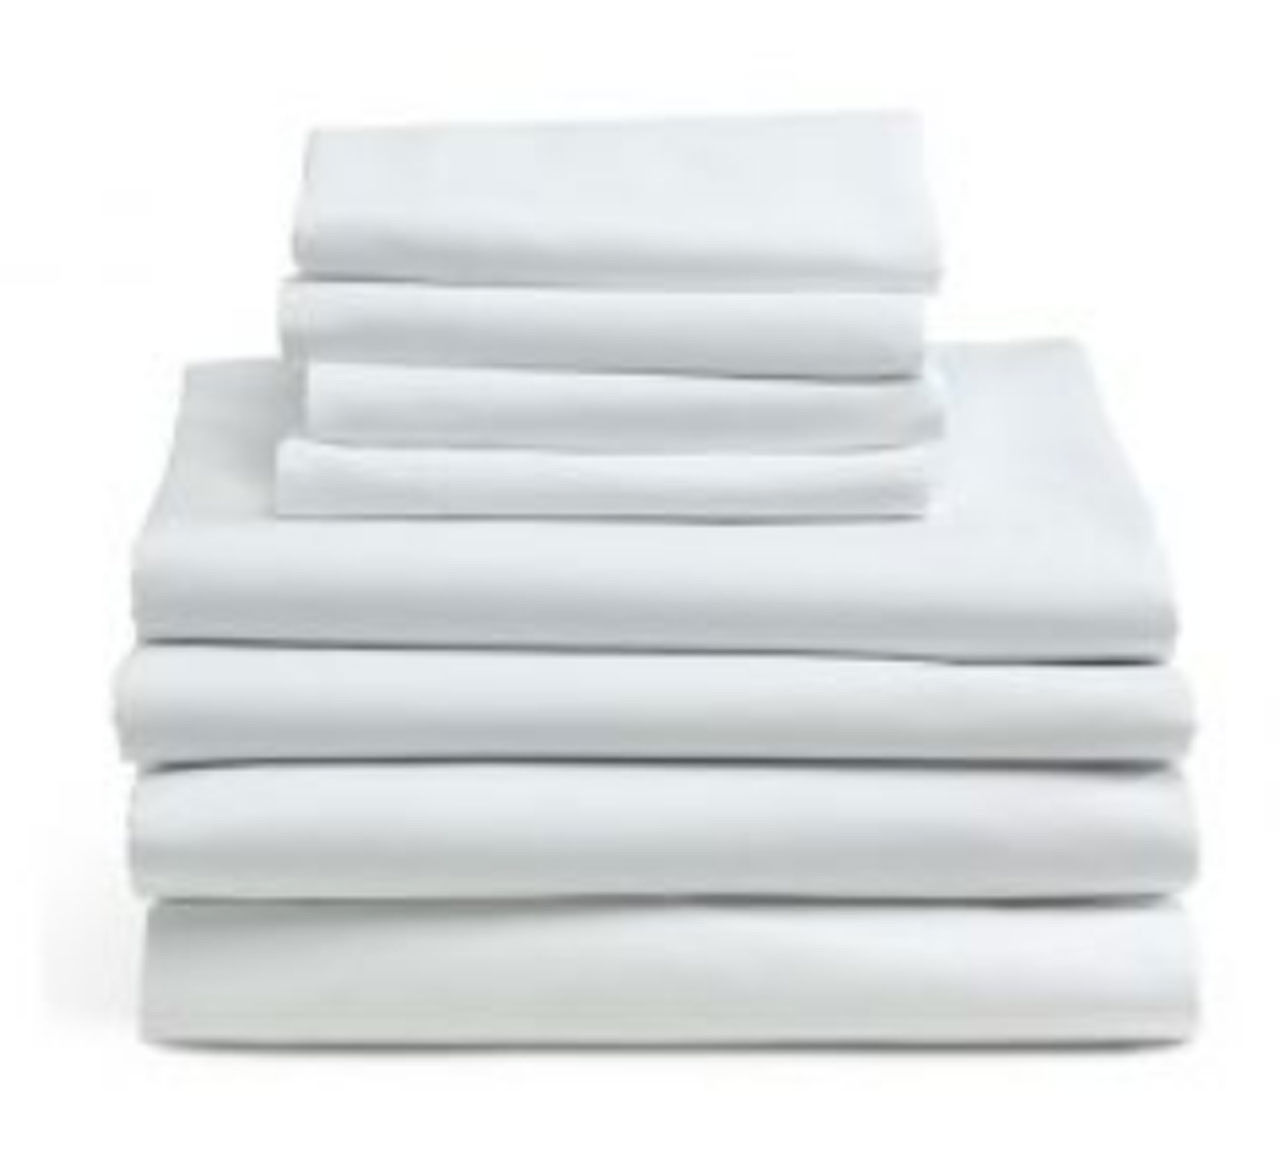 Where are the Royal Star T-180 Hospitality Bed Sheets from royal star wholesale ideally used?